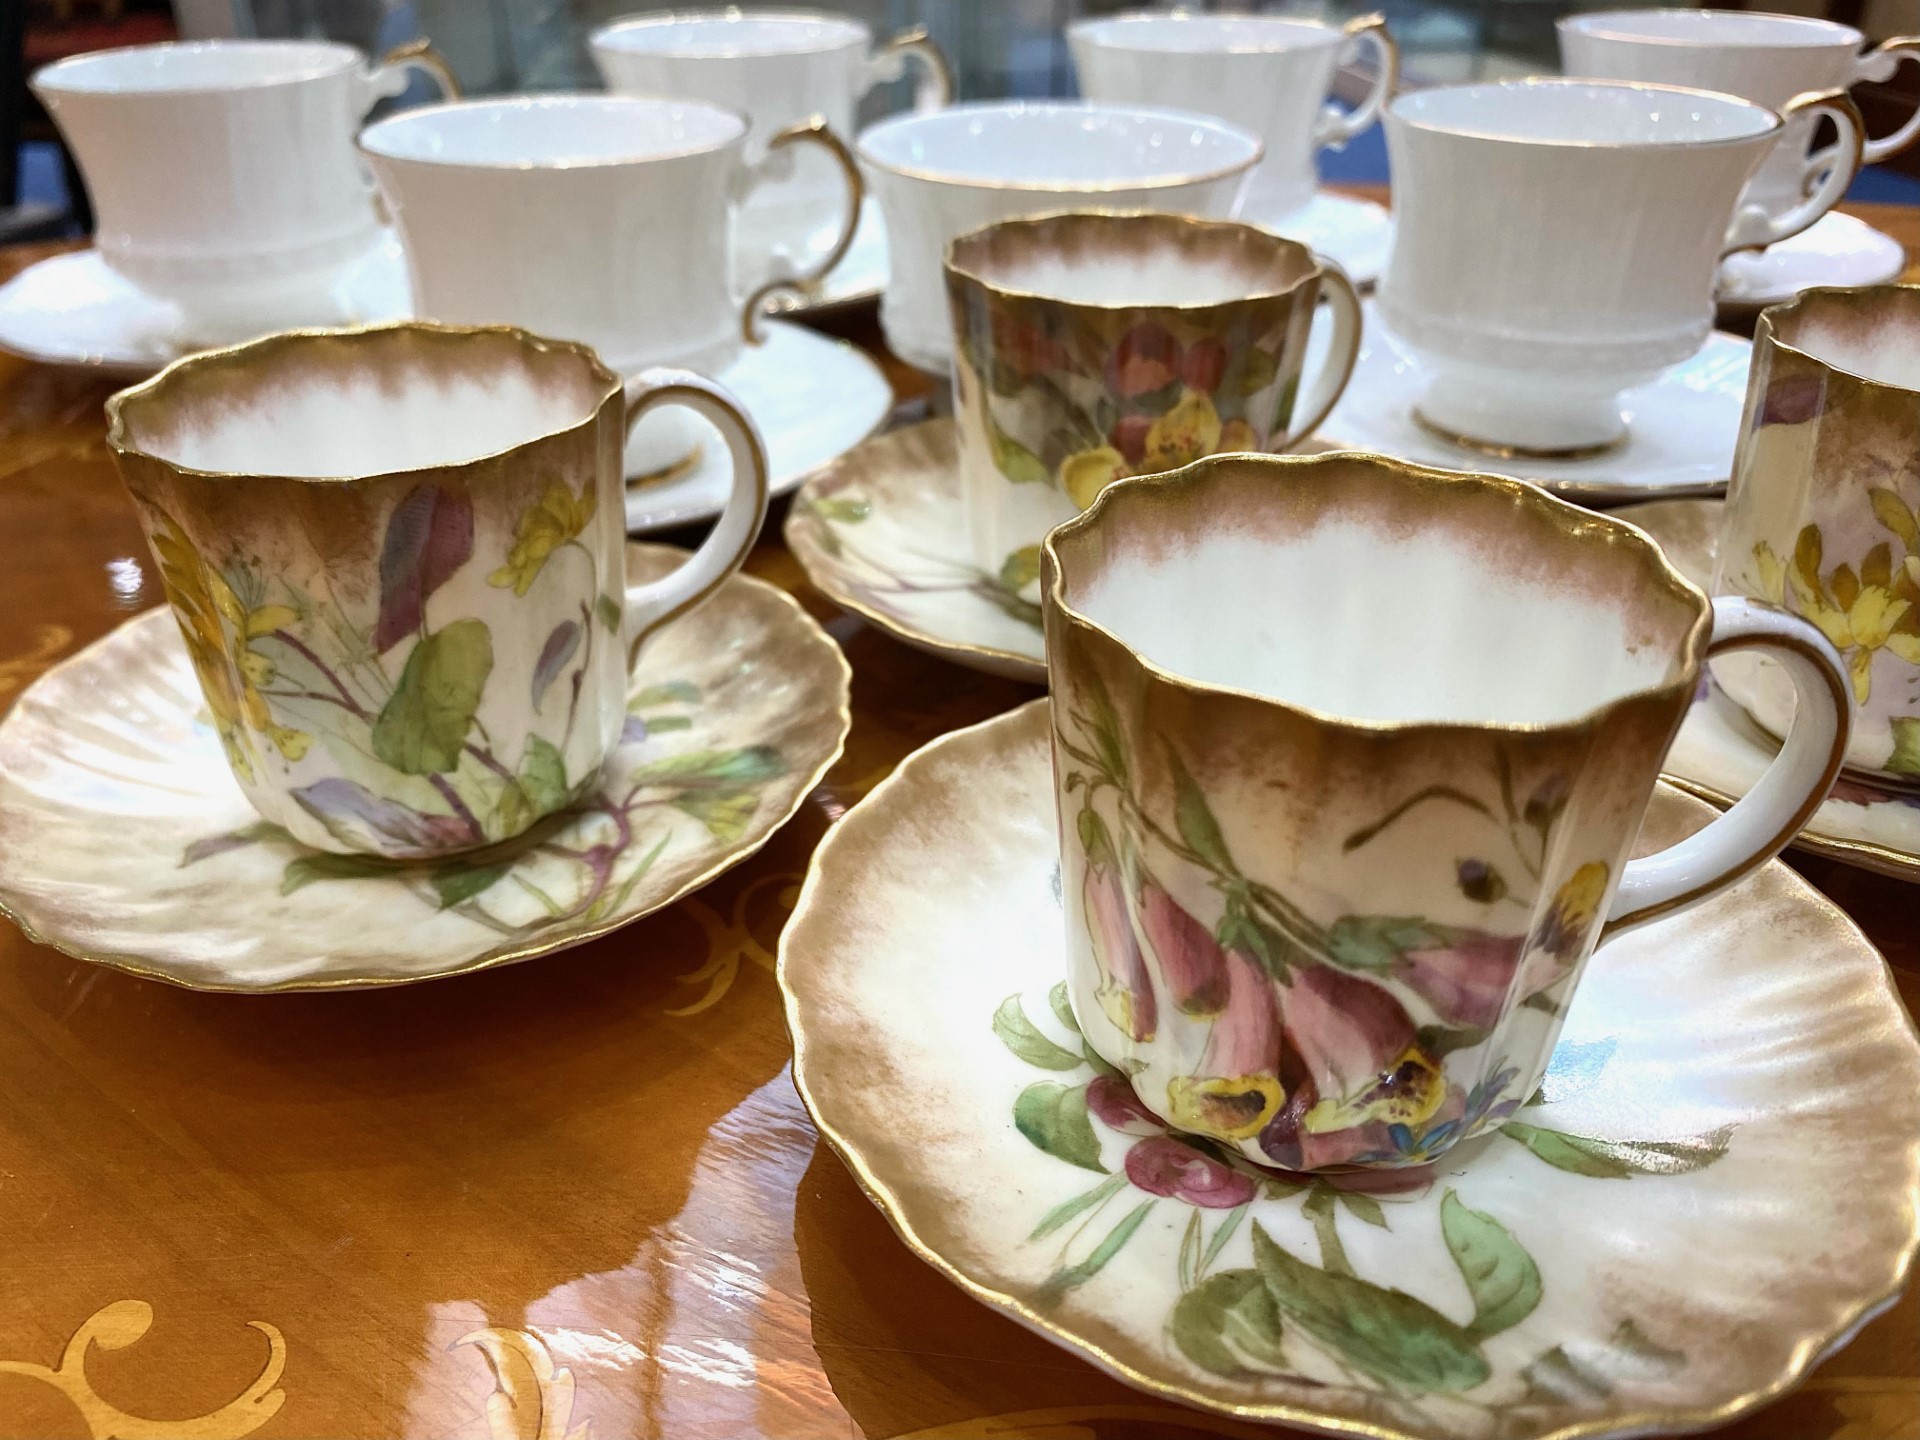 Doulton Burslem Vintage Set comprising four small cups and saucers, decorated with a delicate floral - Image 2 of 3